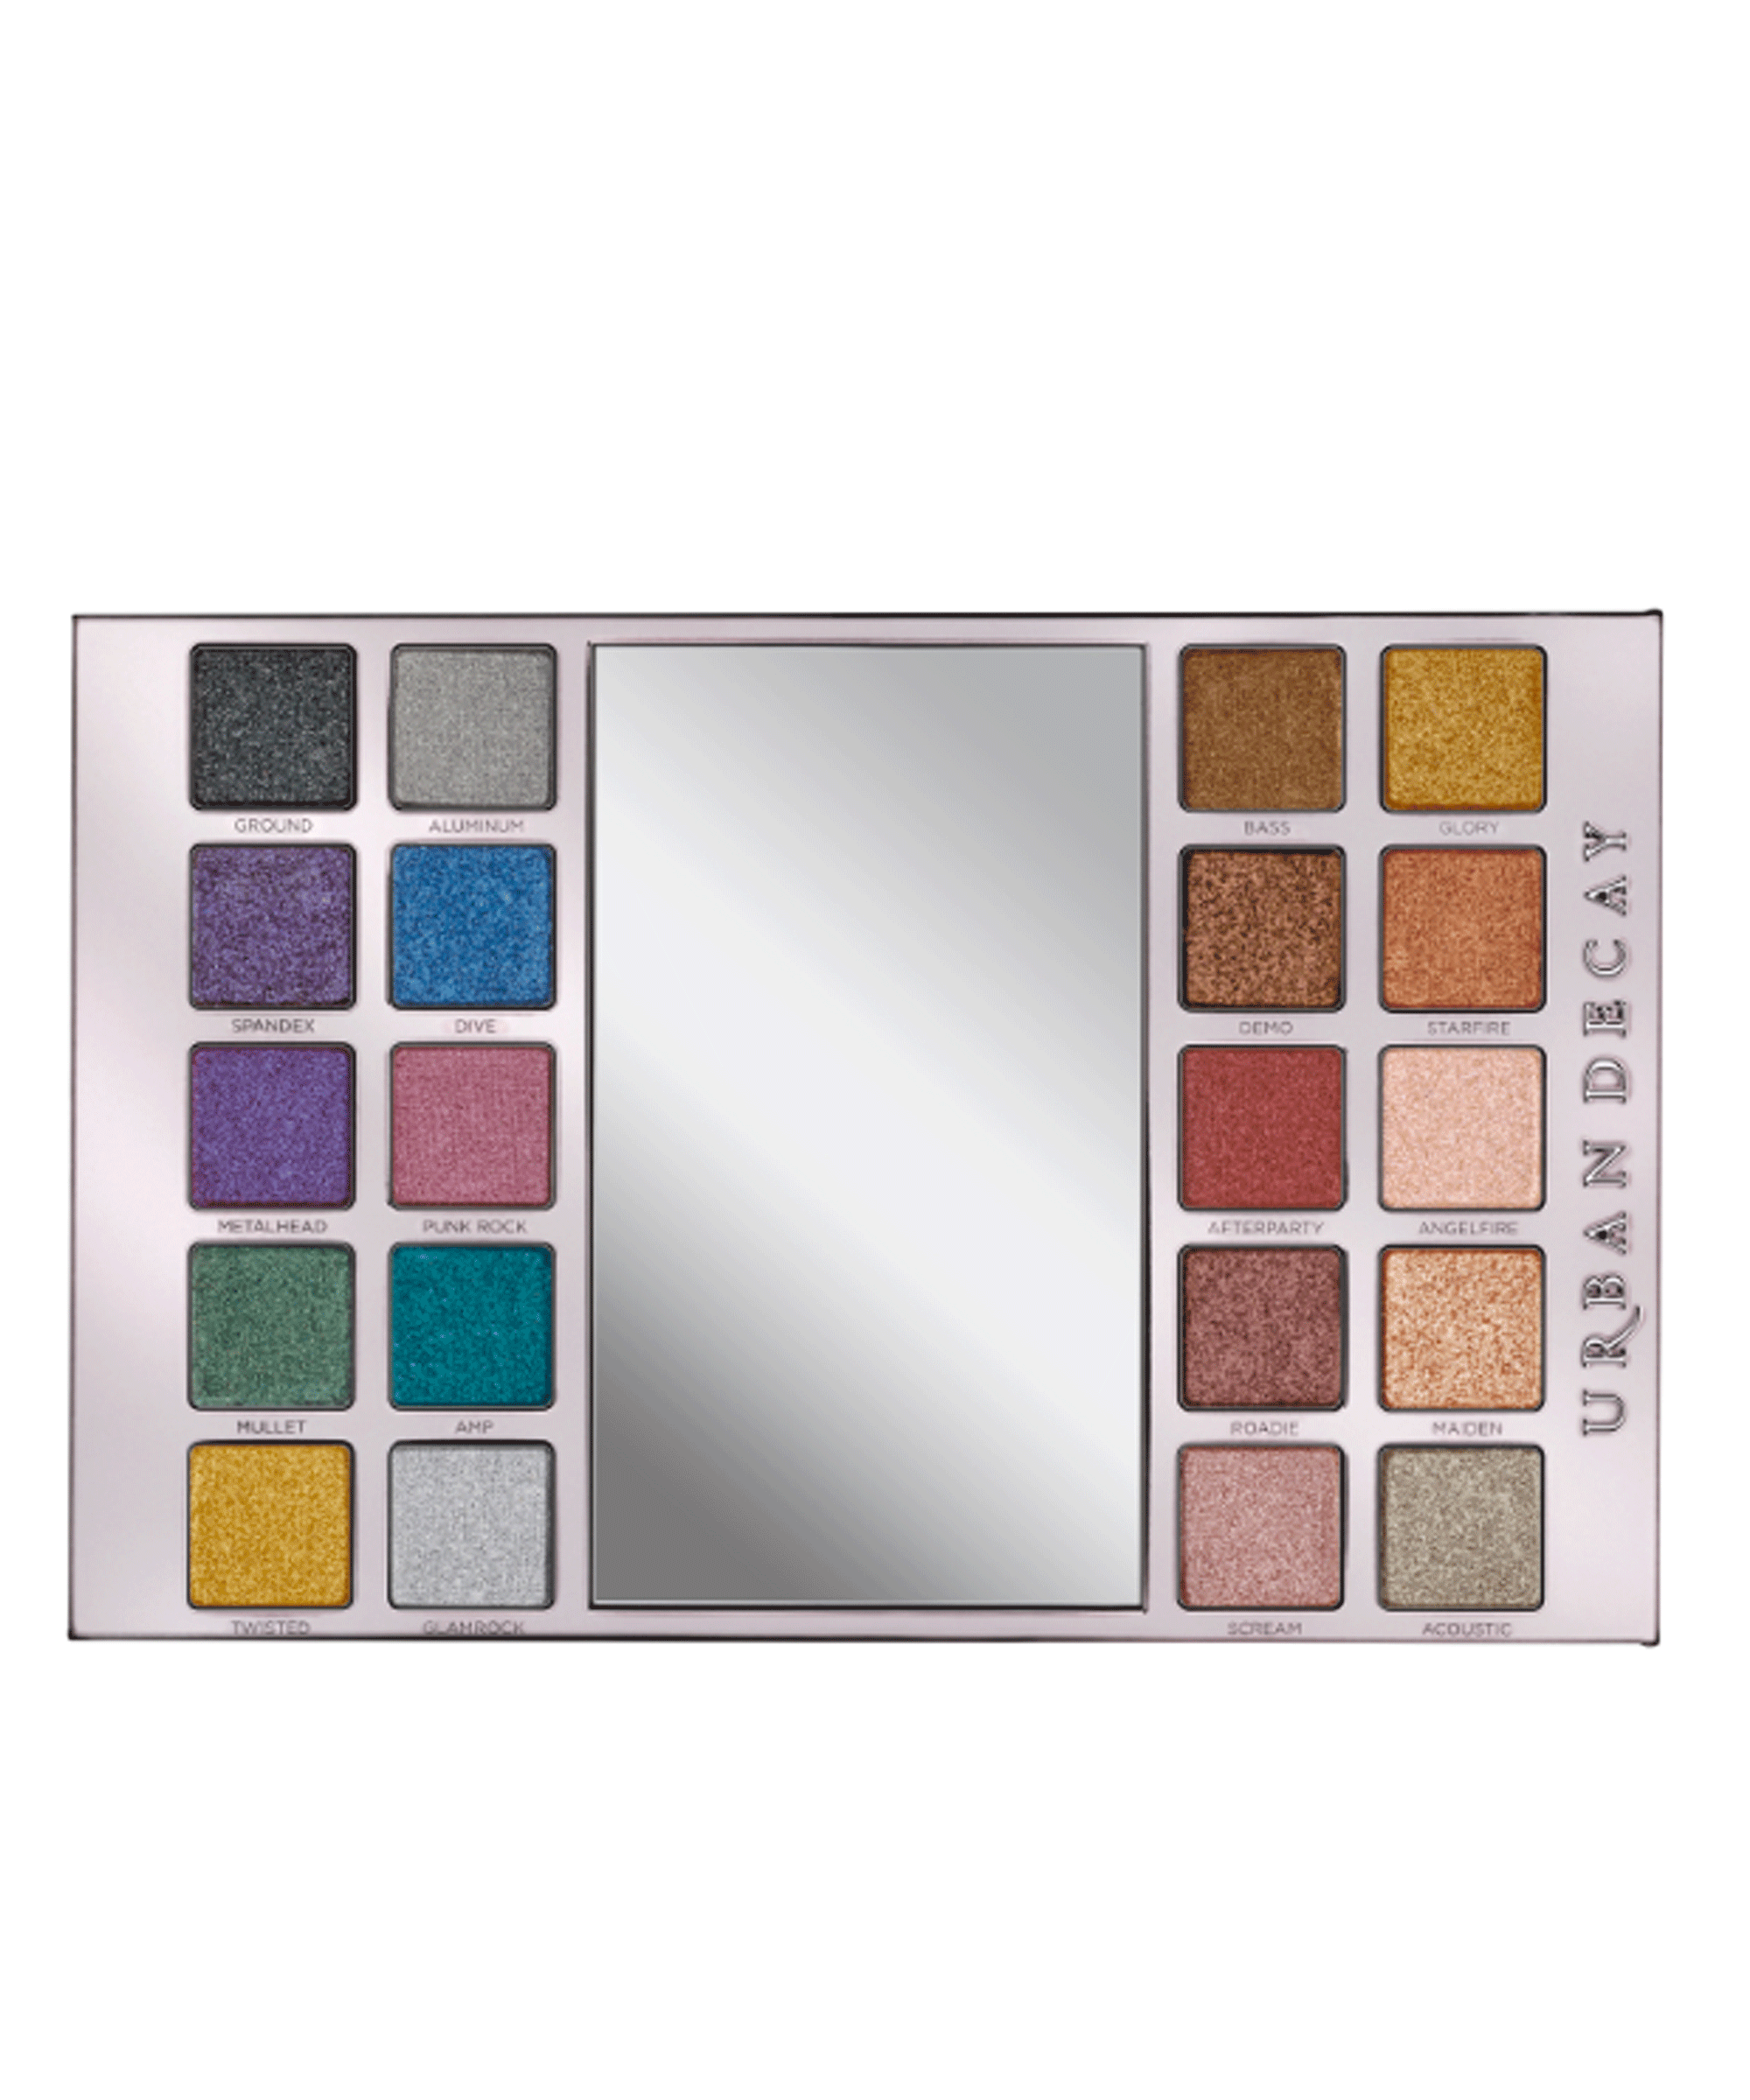 Your First Look At Urban Decay’s Heavy Metals Palette.